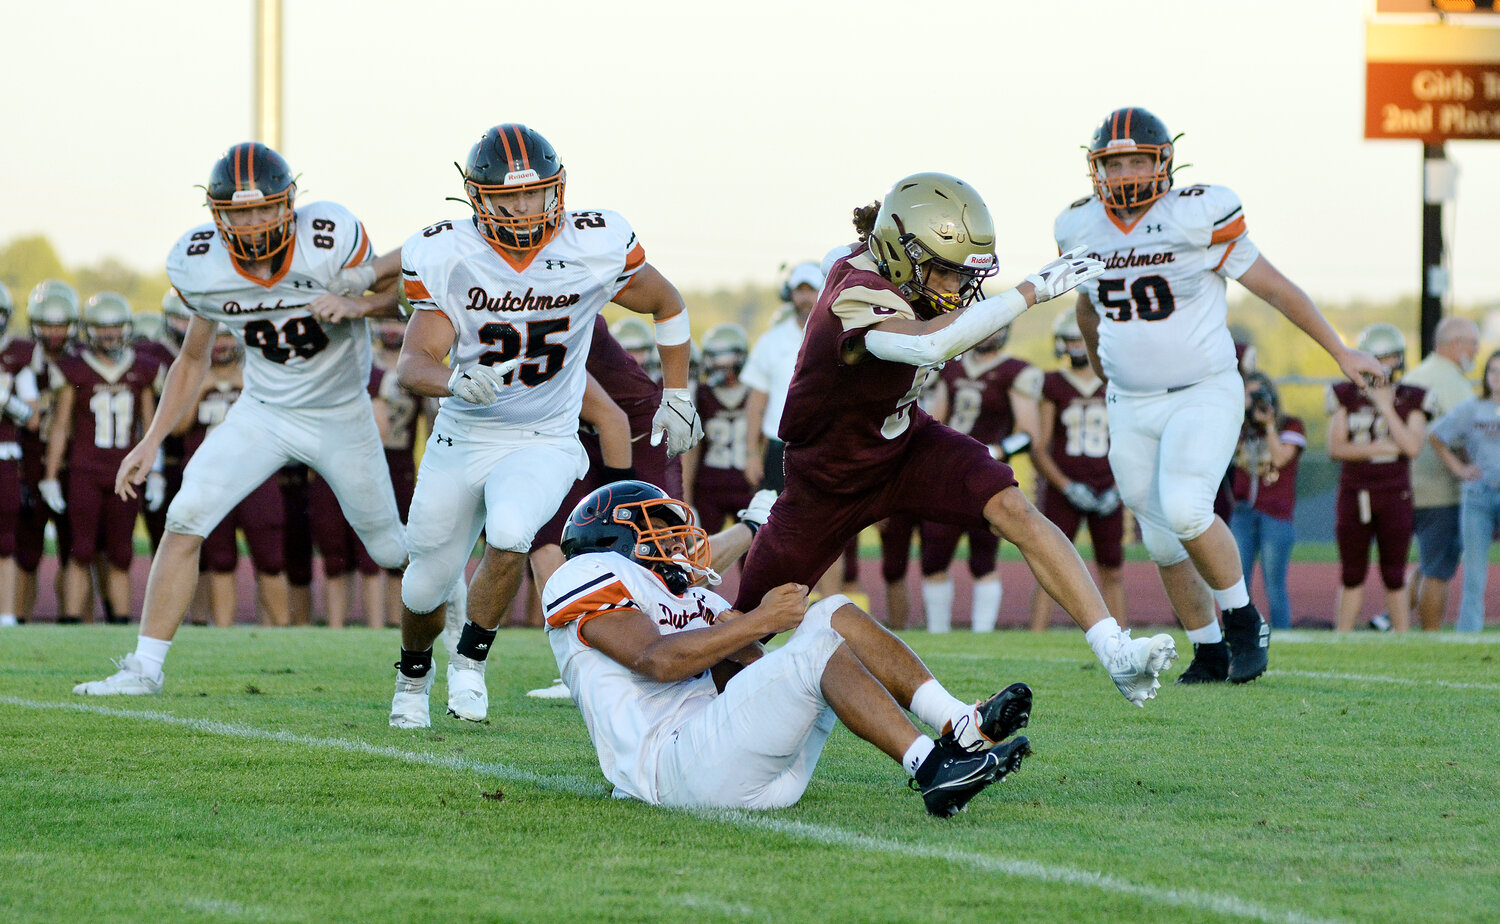 Isaiah Gates (center) grabs a hold of Eldon’s Andrew Beanland while fellow Dutchmen defenders (from left) Dalton Pyrtle, Logan Bailey and Landen Diestelkamp look to help Gates bring down the Mustang ball carrier during Owensville’s 35-31 victory Friday night at Victor Field inside Mustang Memorial Park.